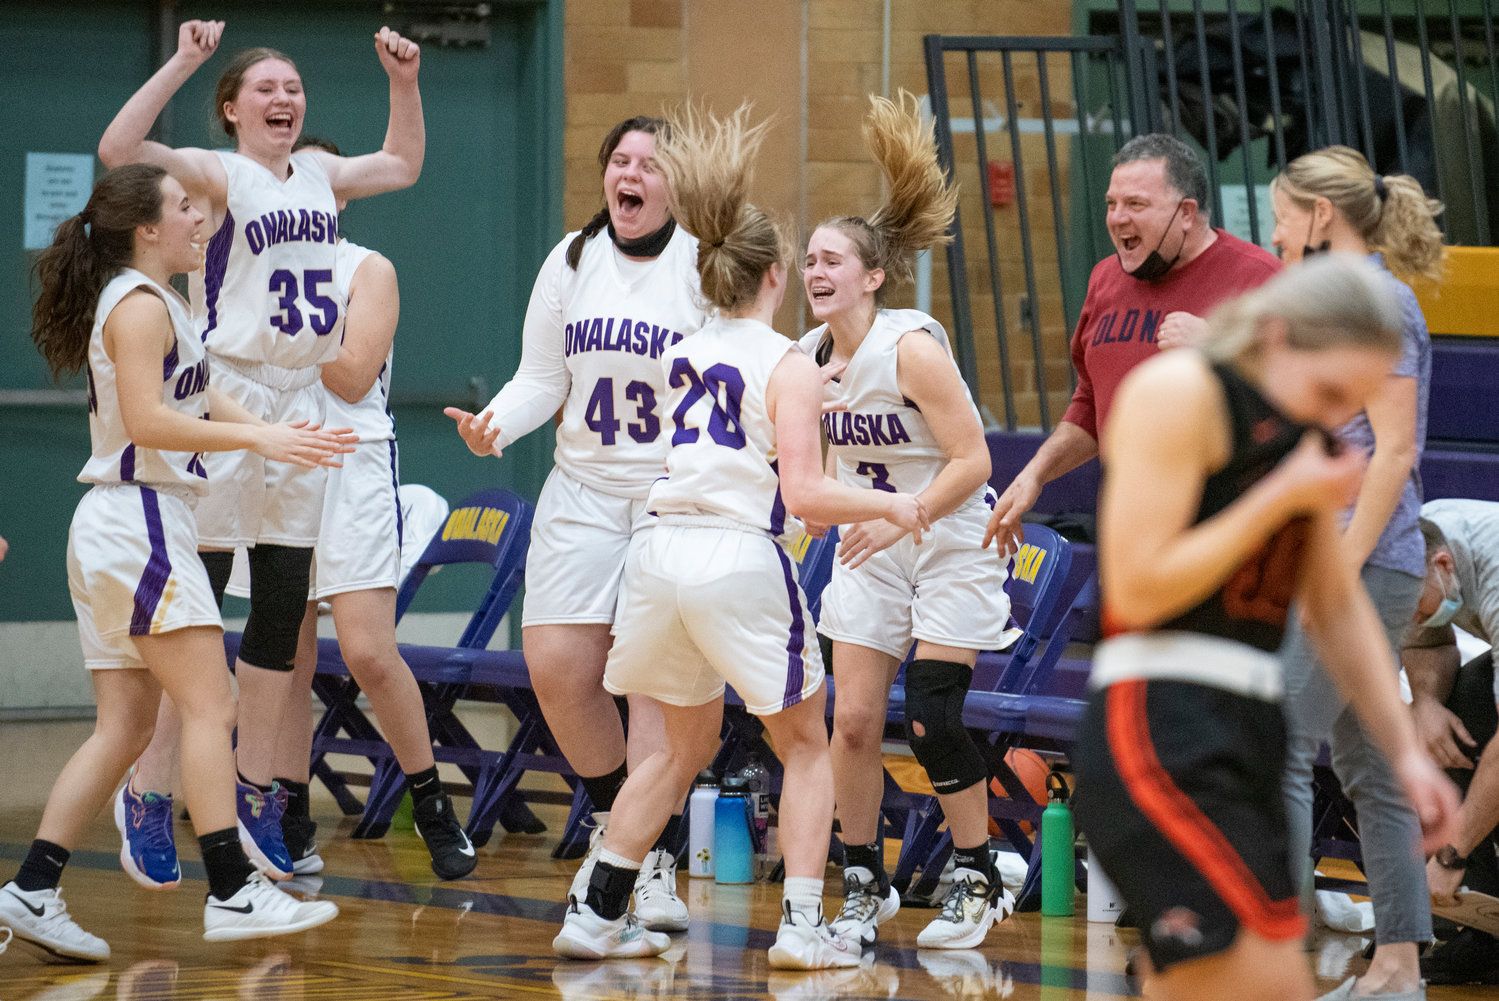 Onalaska players leap in celebration after completing a 39-37, come-from-behind victory over visiting Rainier on Jan. 20.